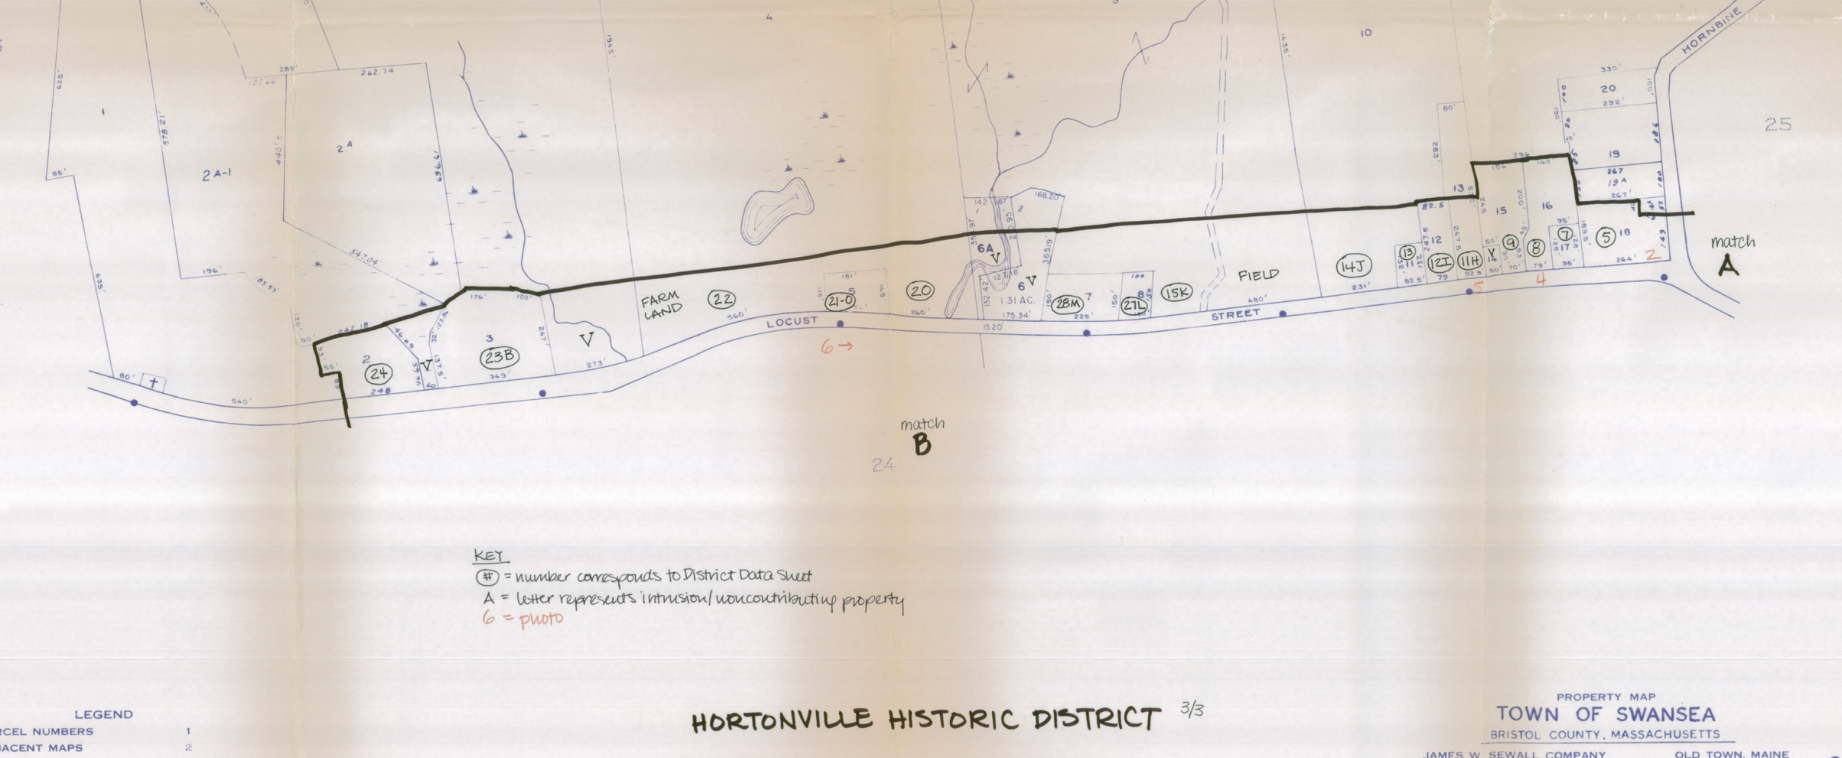 The Hortonville Historic District Map